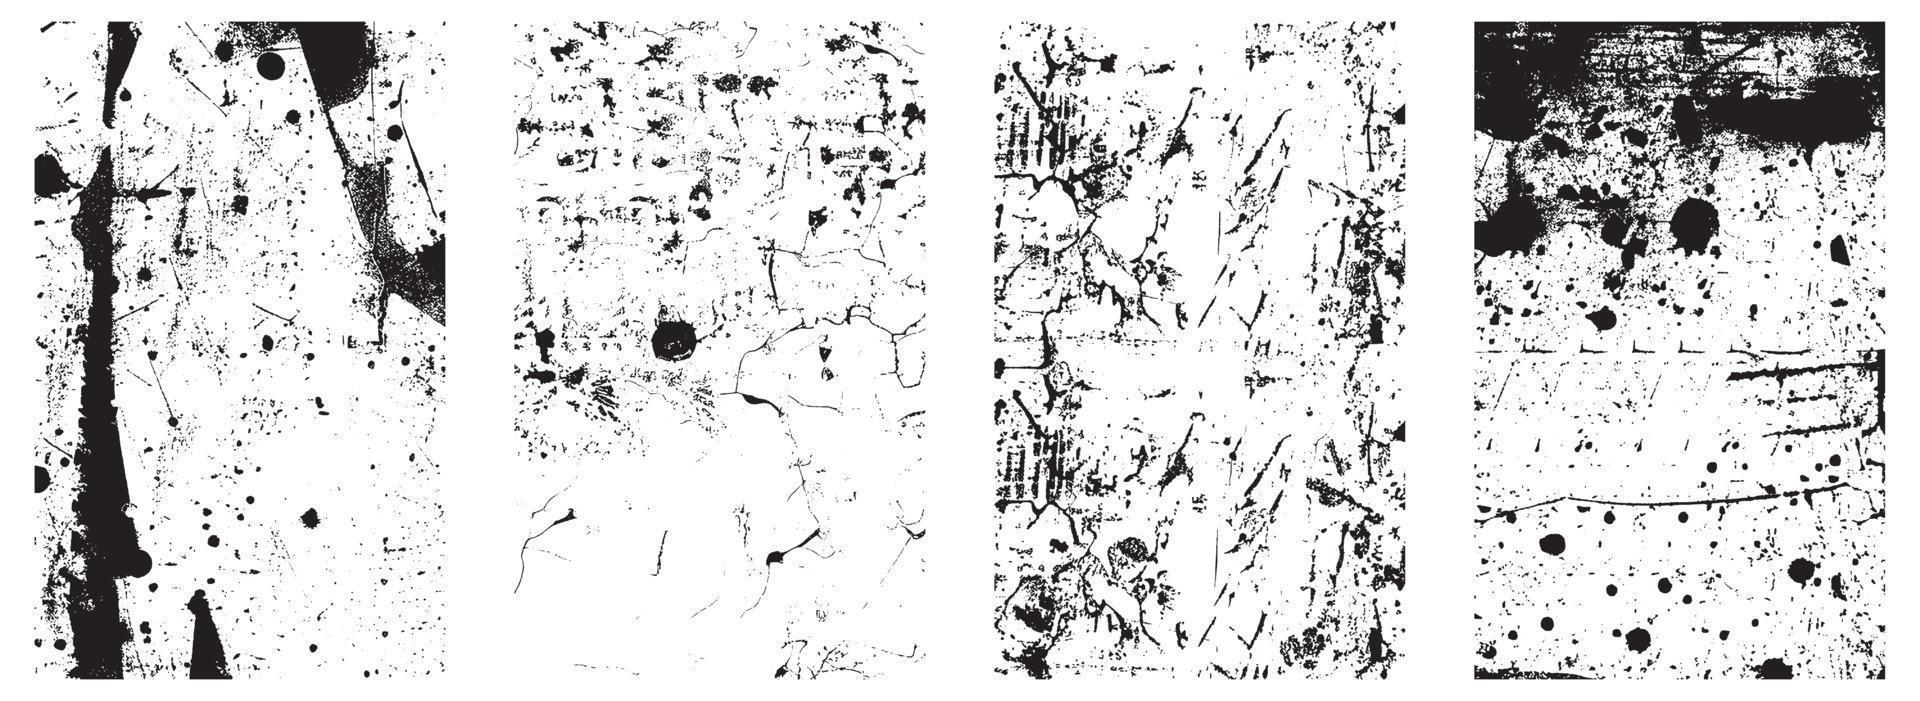 Set of Grunge Distressed Vector Textures - Black and White Backgrounds with Splatter, Scratch and Stain Effects. EPS 10.